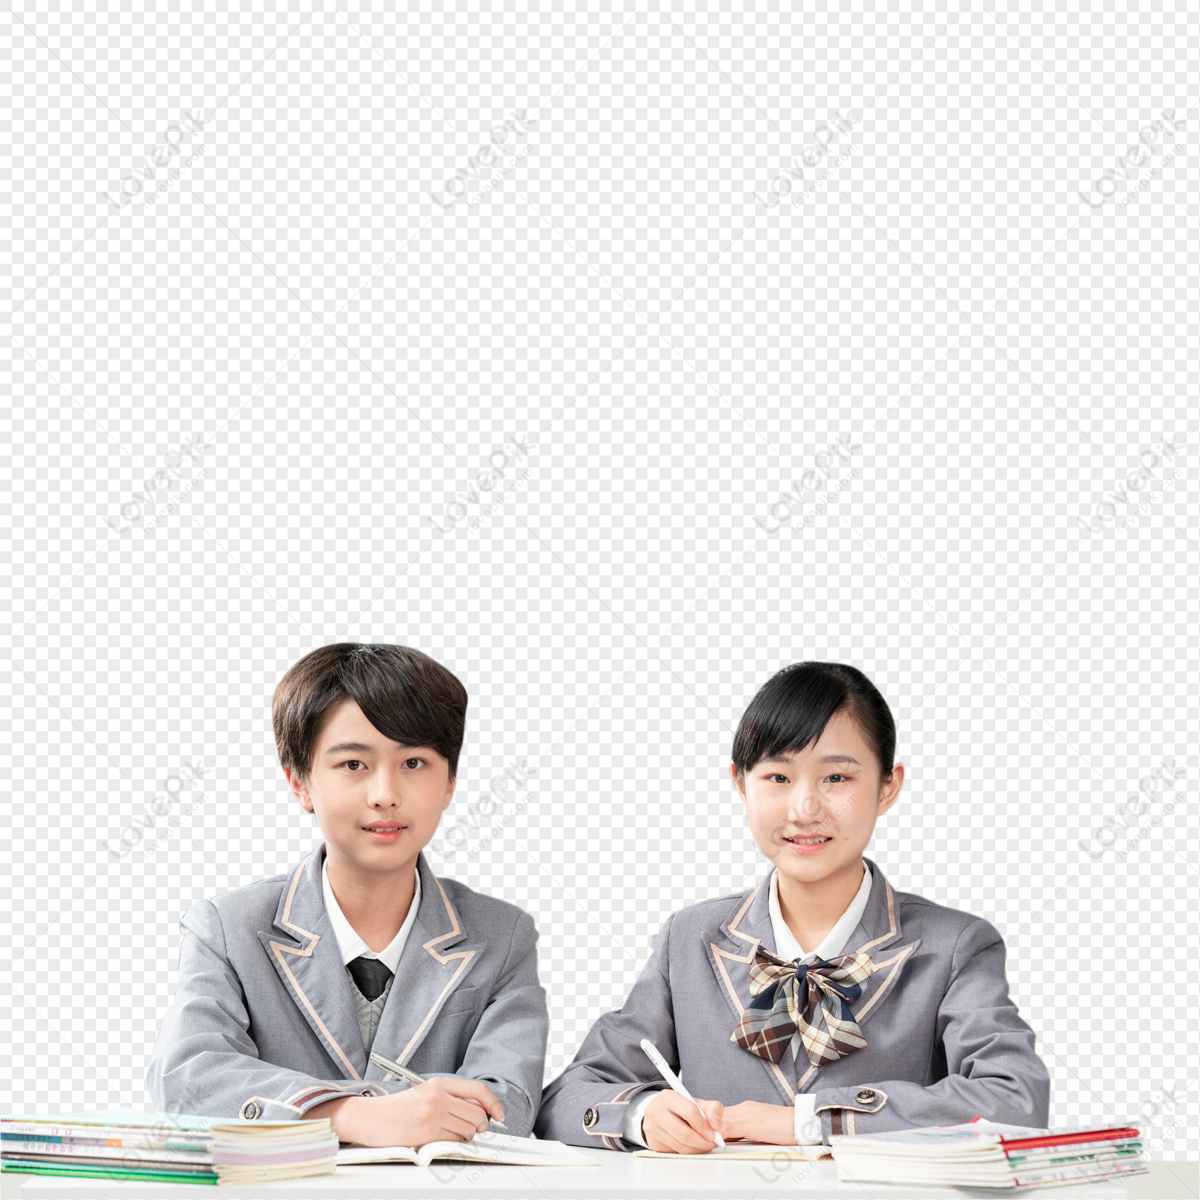 Middle school students writing homework together in the classroo, material, and homework, classroom png transparent background